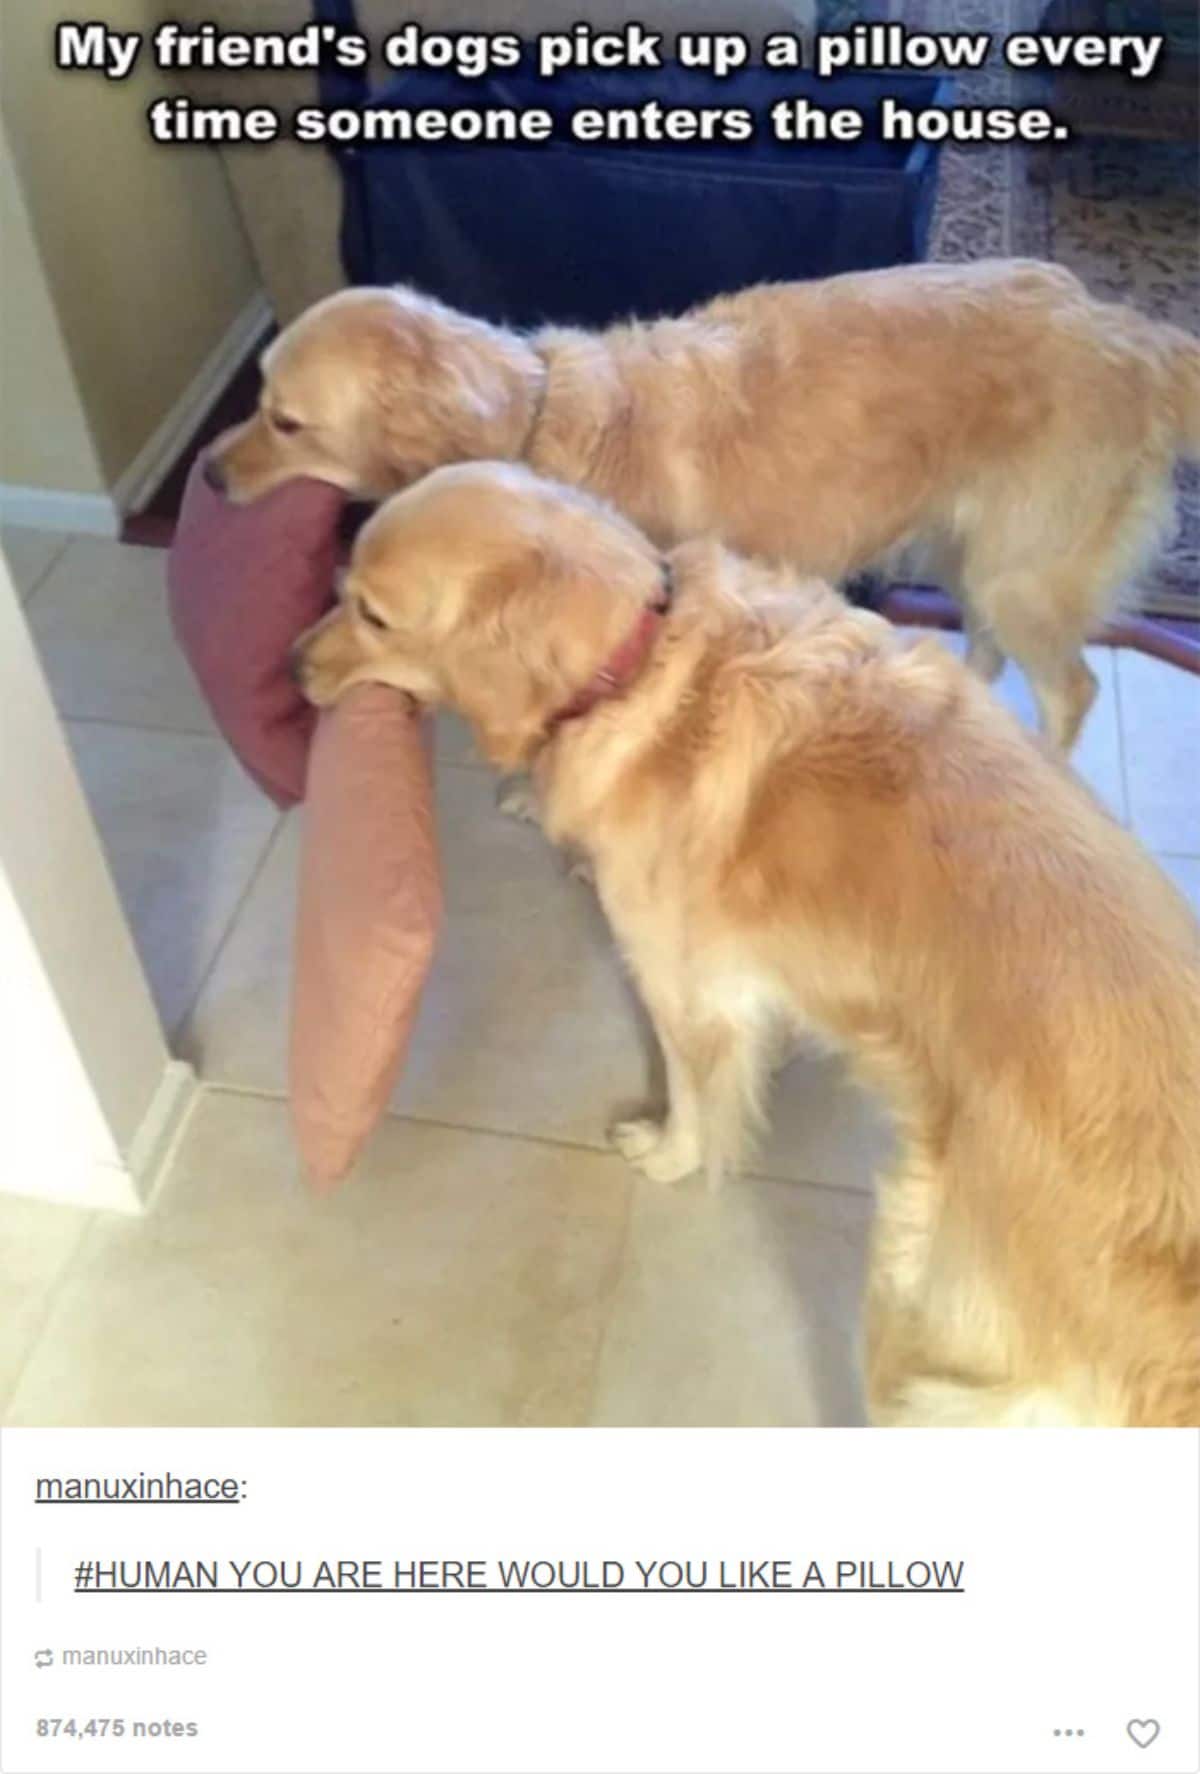 2 golden retrievers holding a brown and orange pillow each